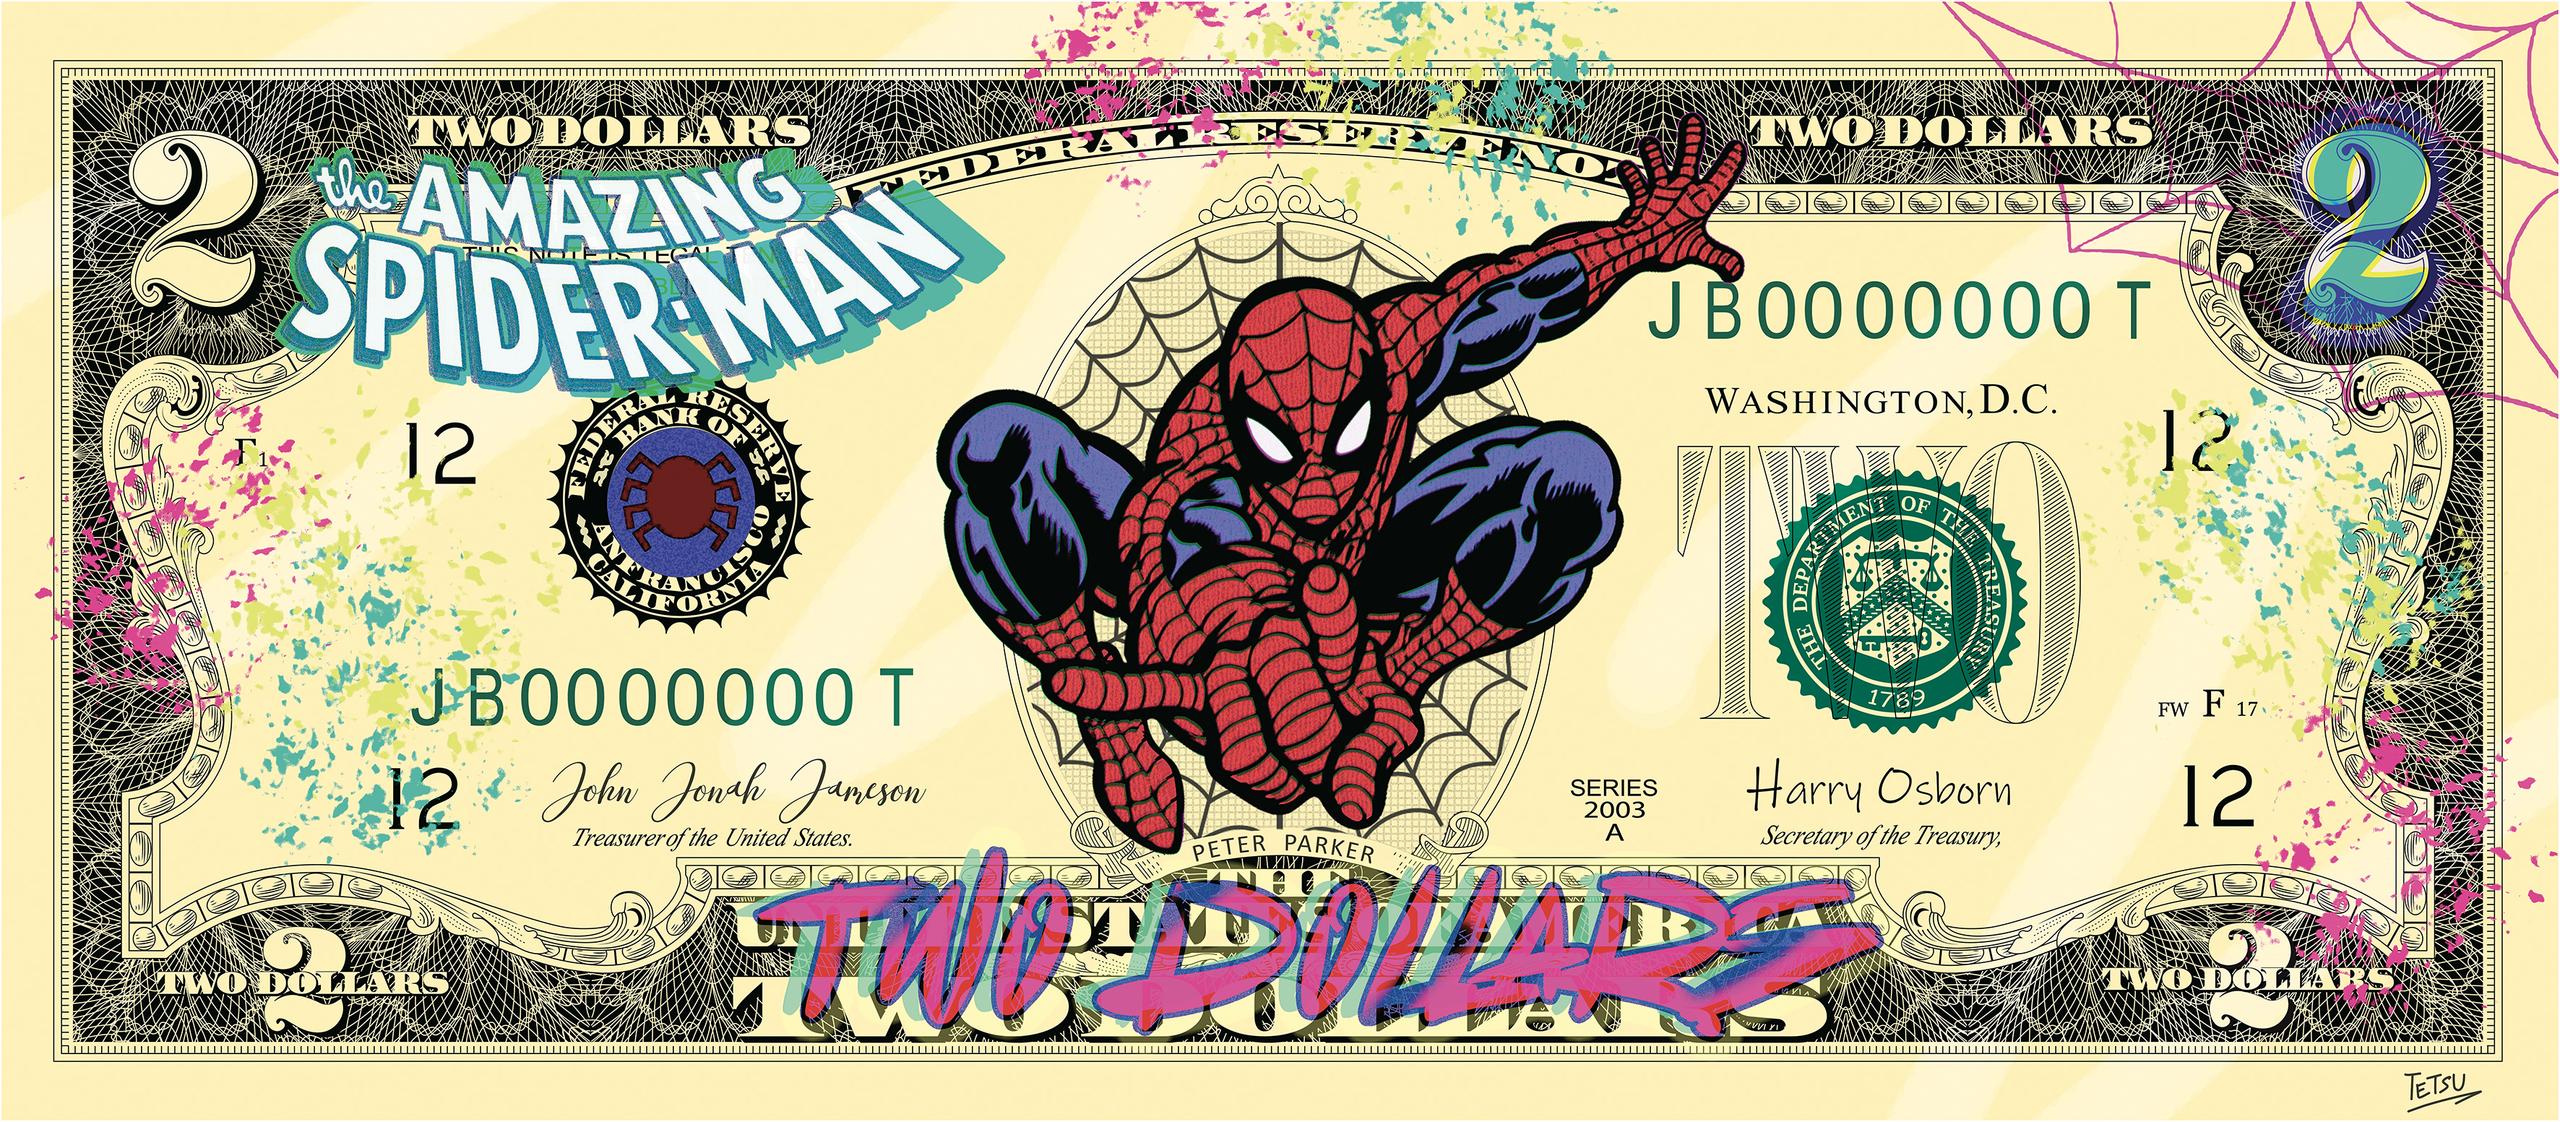 The amazing "Two Dollars Spider-Man"